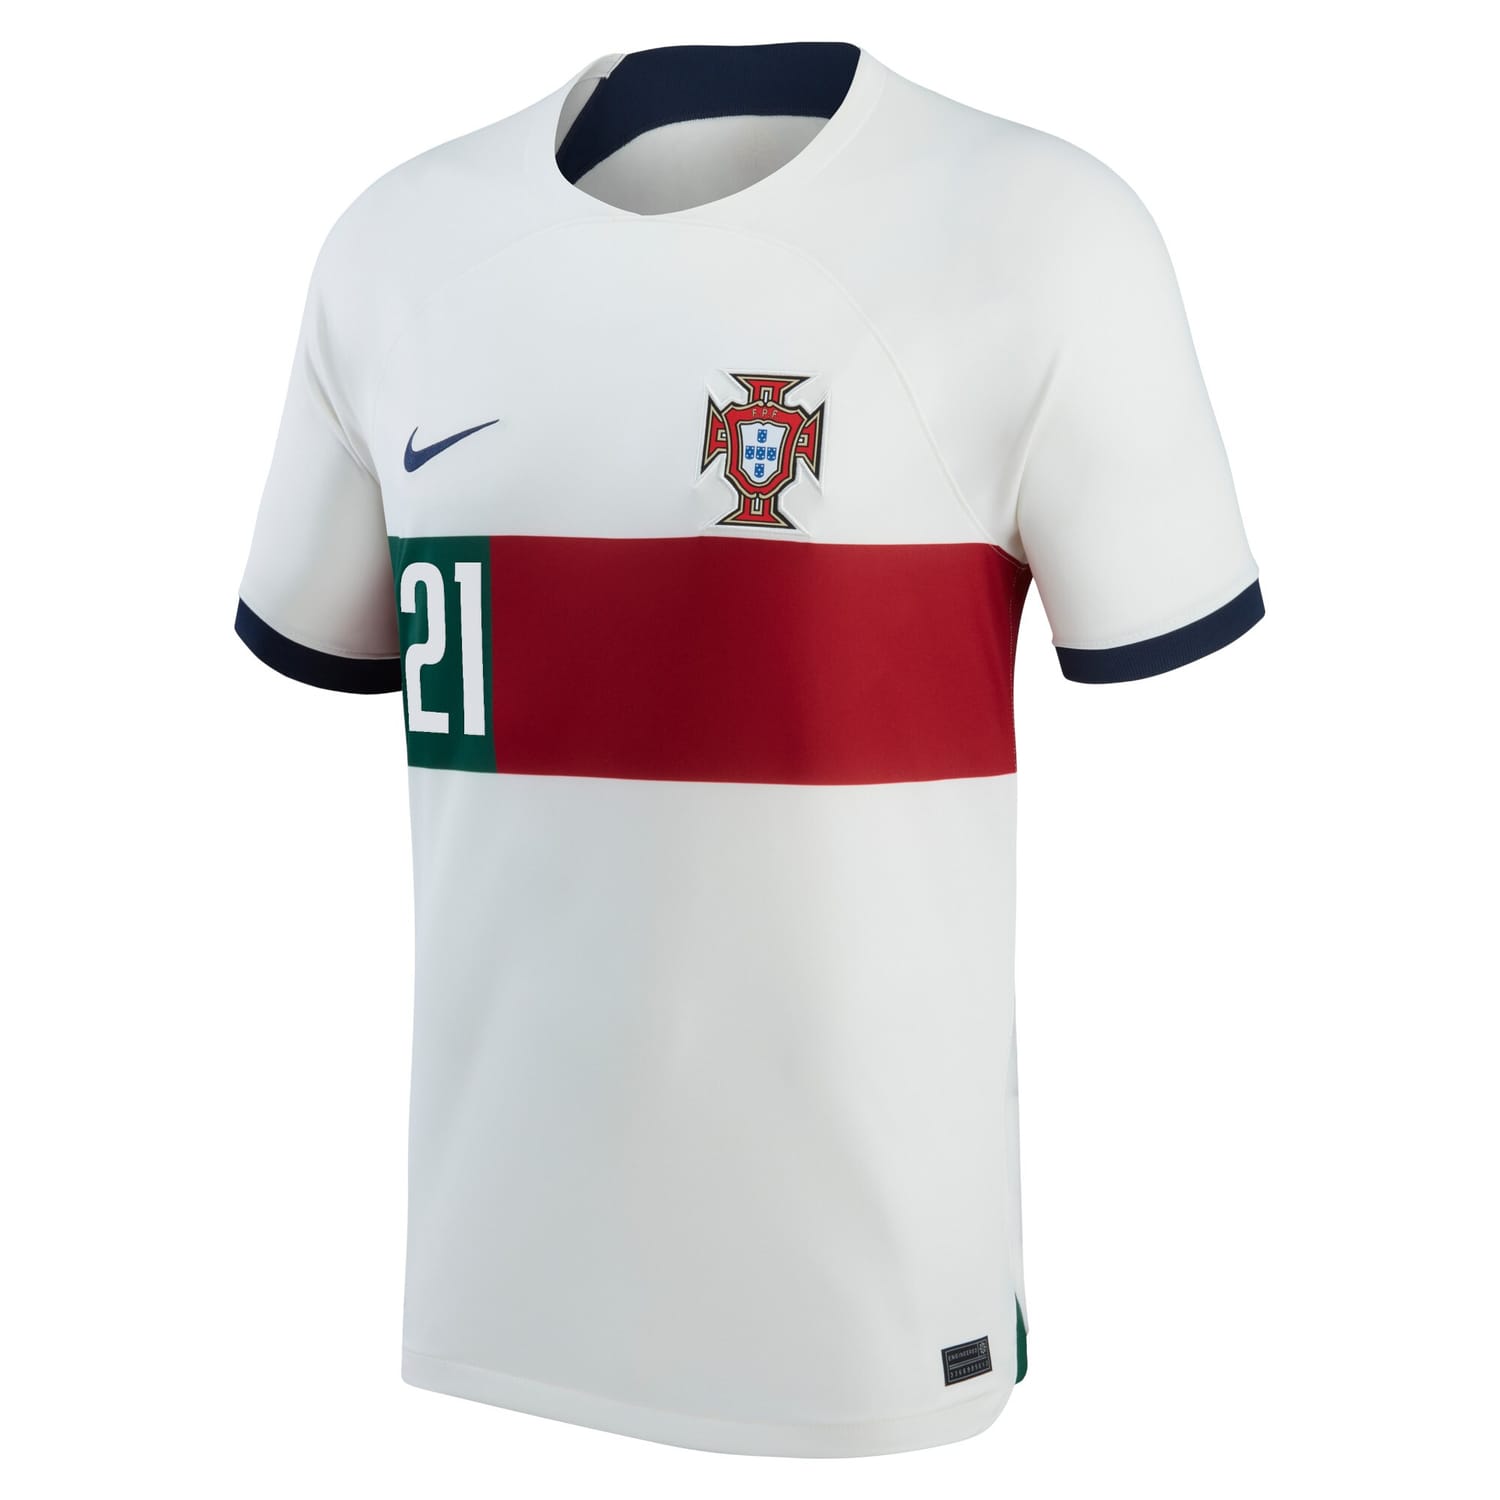 Portugal National Team Away Jersey Shirt White 2022-23 player Diogo Jota printing for Men